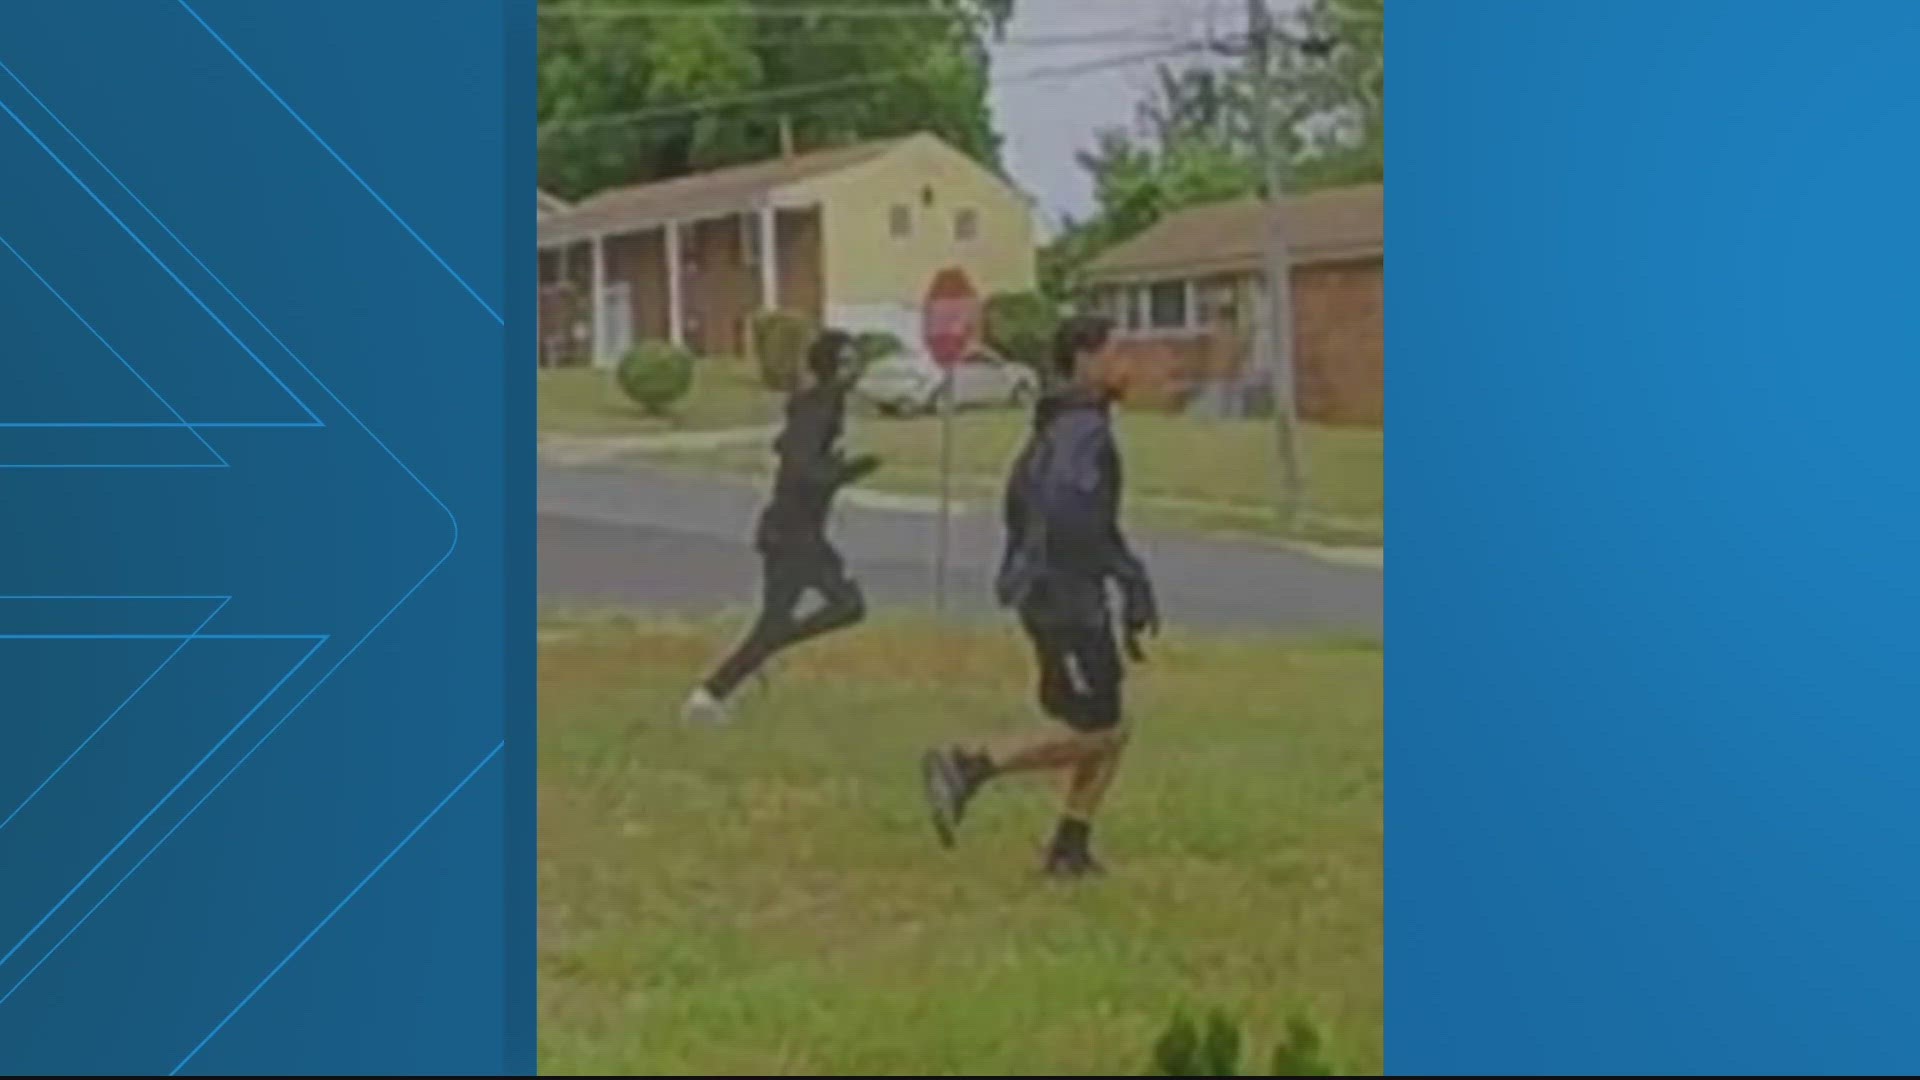 Investigators are seeking the community's assistance in identifying two people seen running from the area of the crash that killed 20-year-old Dyanny Leiva Sabillon.